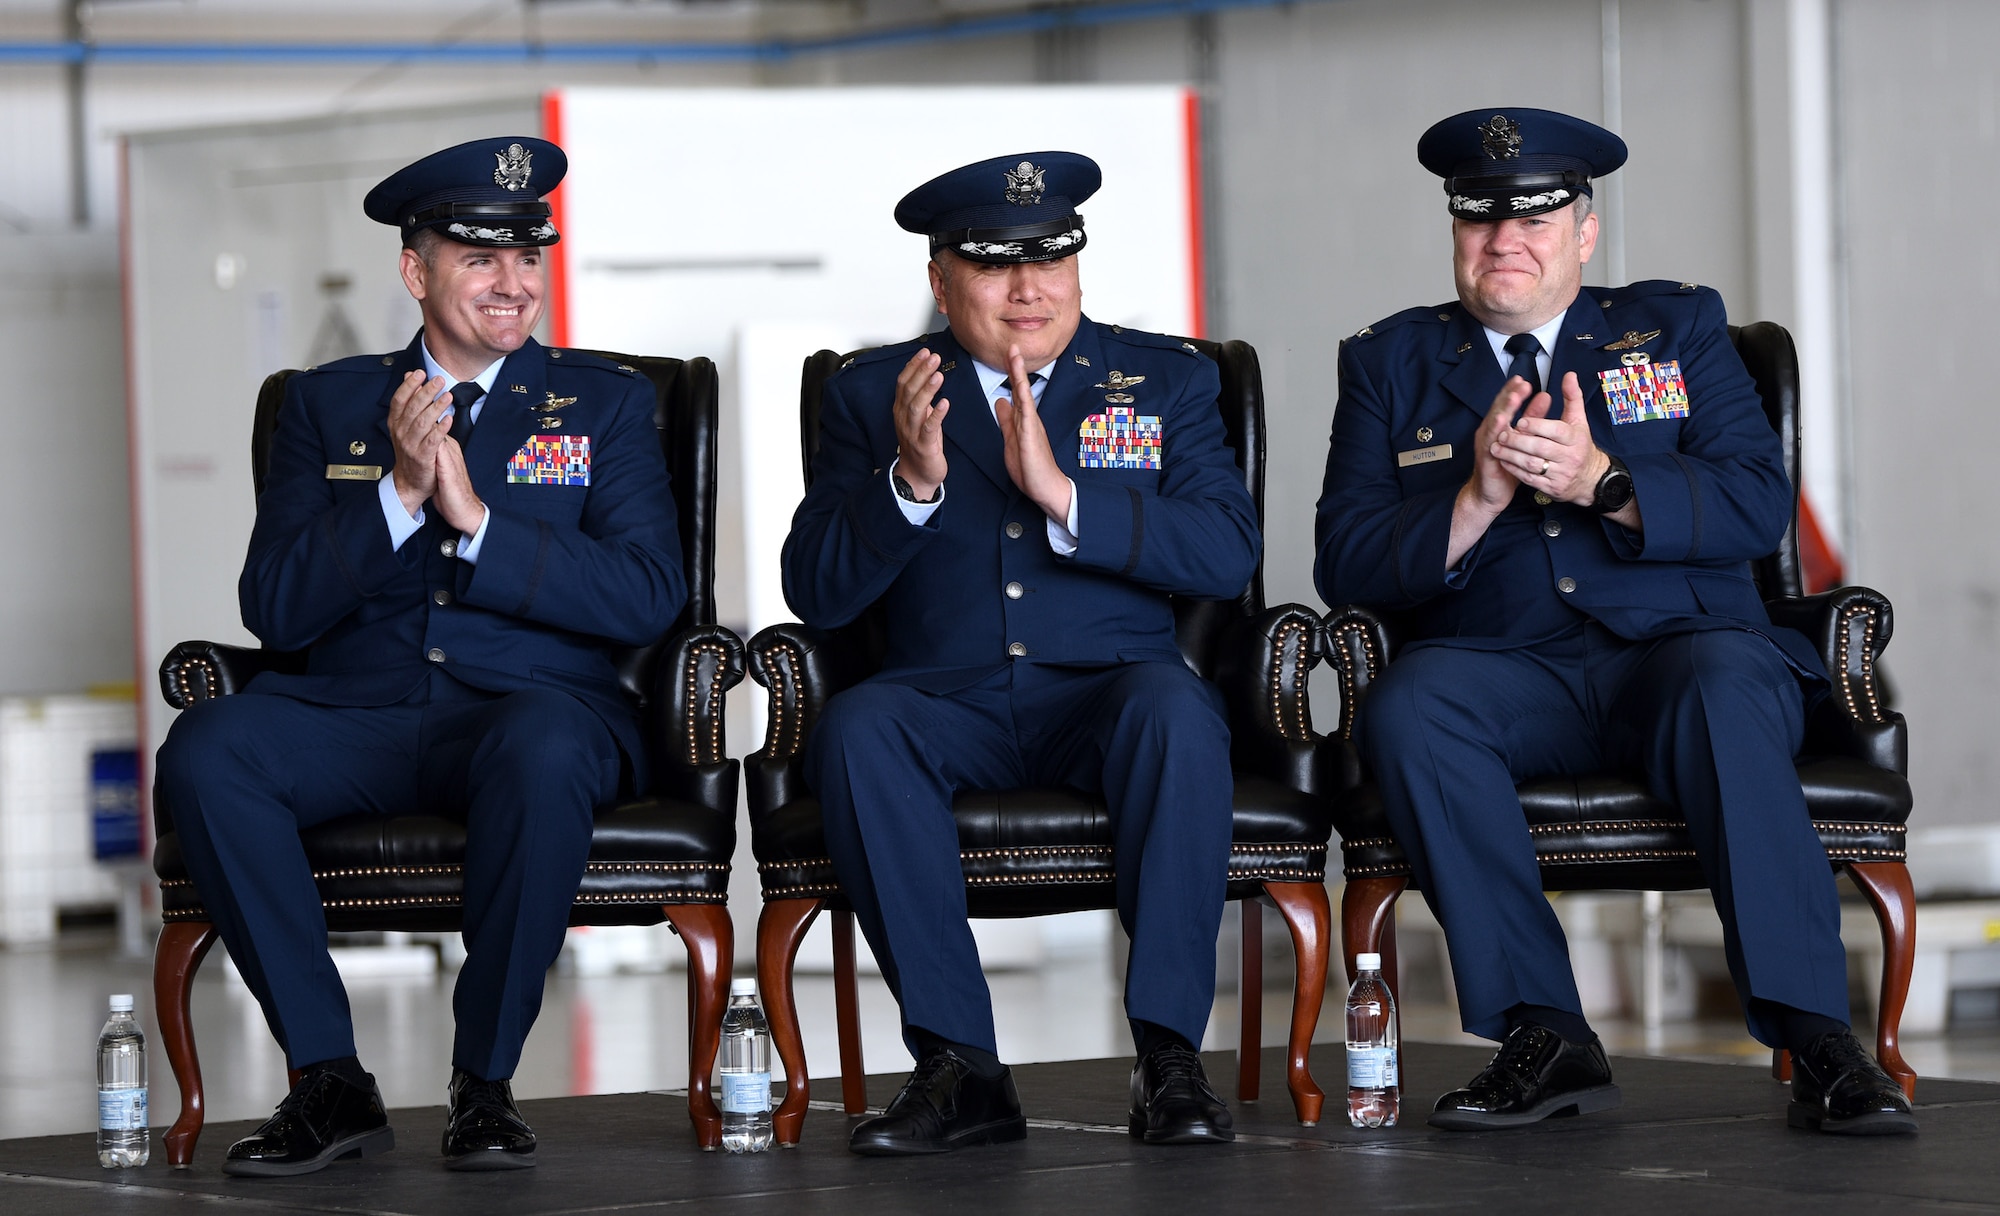 U.S. Air Force Col. Gene Jacobus, left, 100th Air Refueling Wing commander; Col. Van Thai, center, 100th Operations Group commander, and Col. Thomas Hutton, new 100th OG commander, applaud as guests are welcomed during their change of command at Royal Air Force Mildenhall, England, June 16, 2022. Hutton joins the 100th ARW from Ramstein Air Base, Germany, and Thai is now at Yakota Air Base, Japan. (U.S. Air Force photo by Karen Abeyasekere)